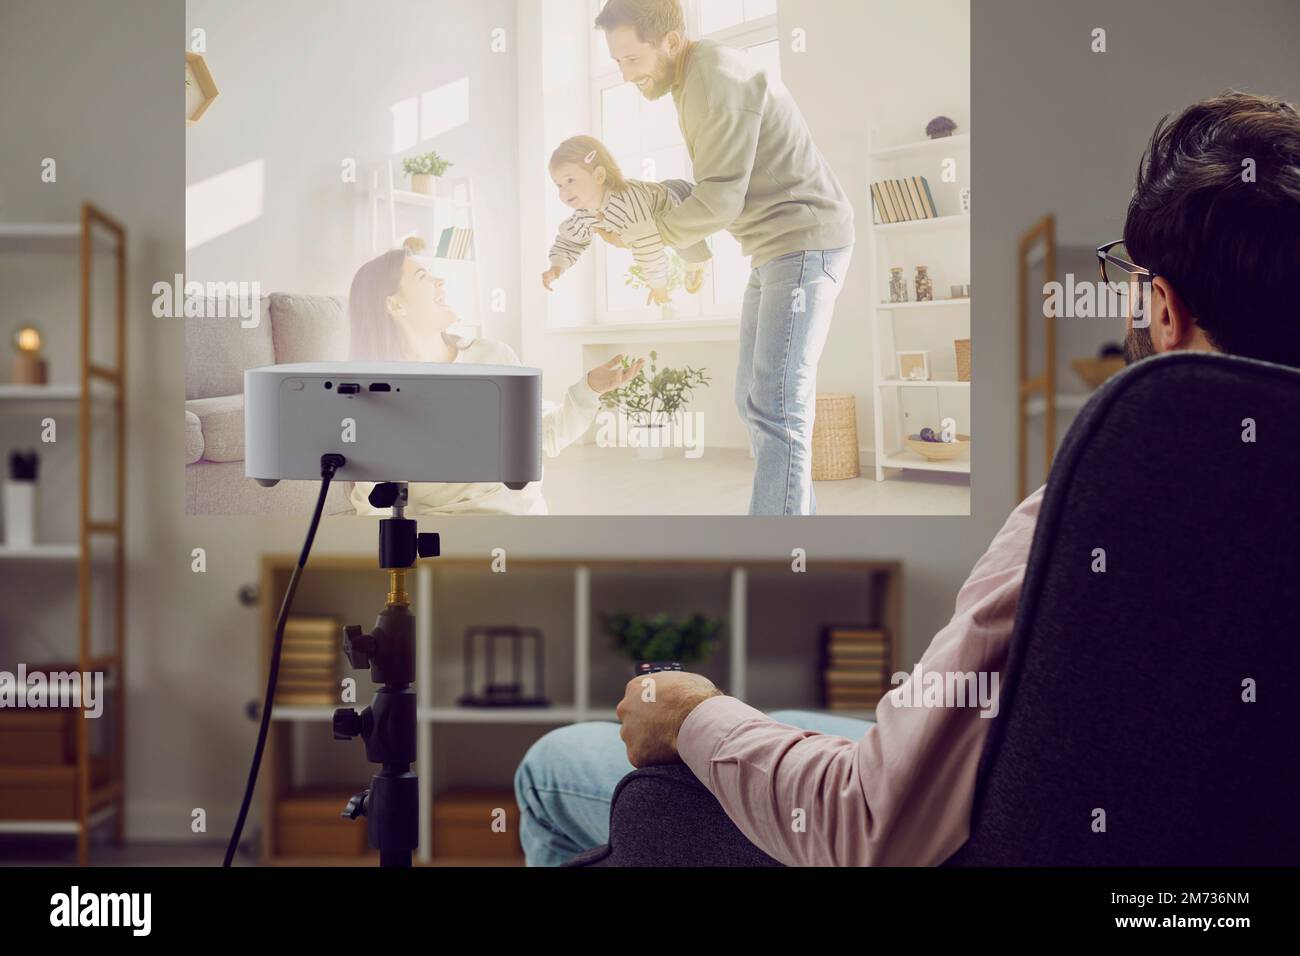 Young man watching a movie or looking at family photos on a modern projector at home Stock Photo